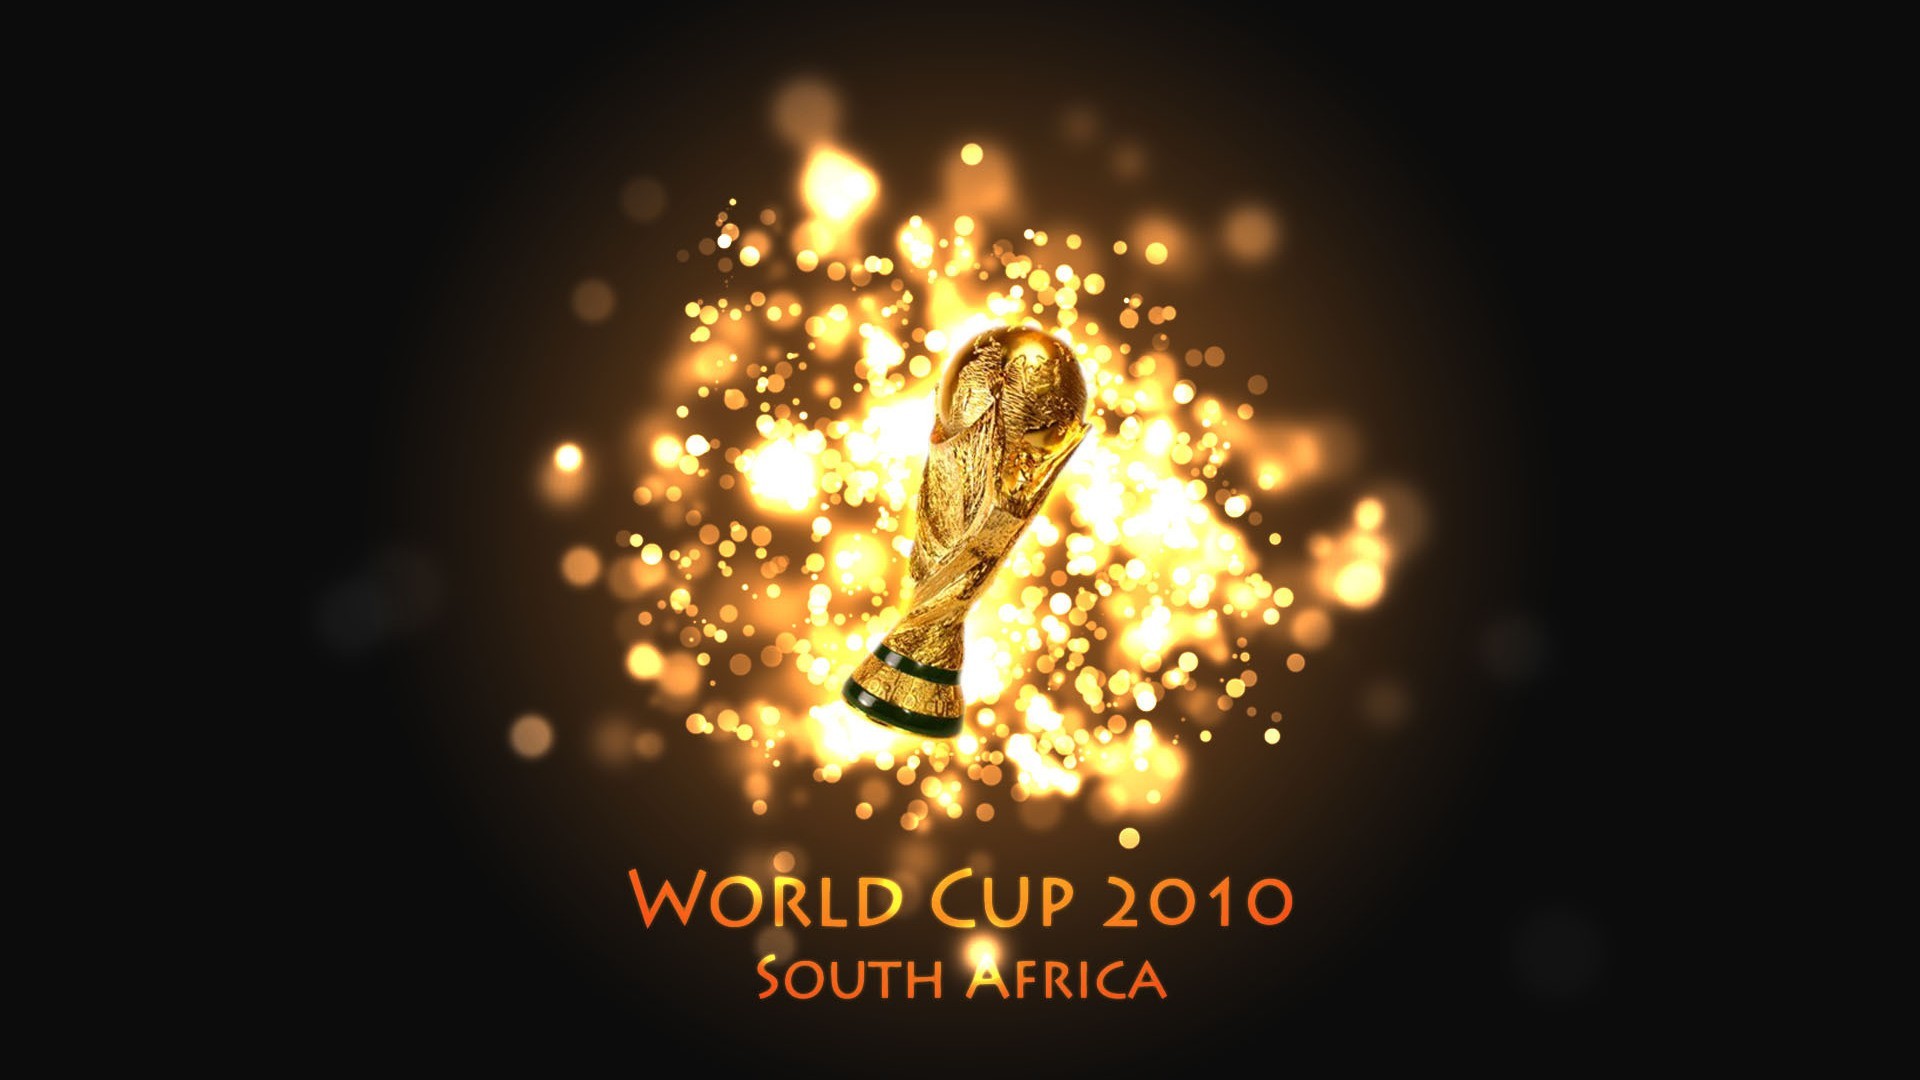 FIFA World Cup, South Africa Wallpaper